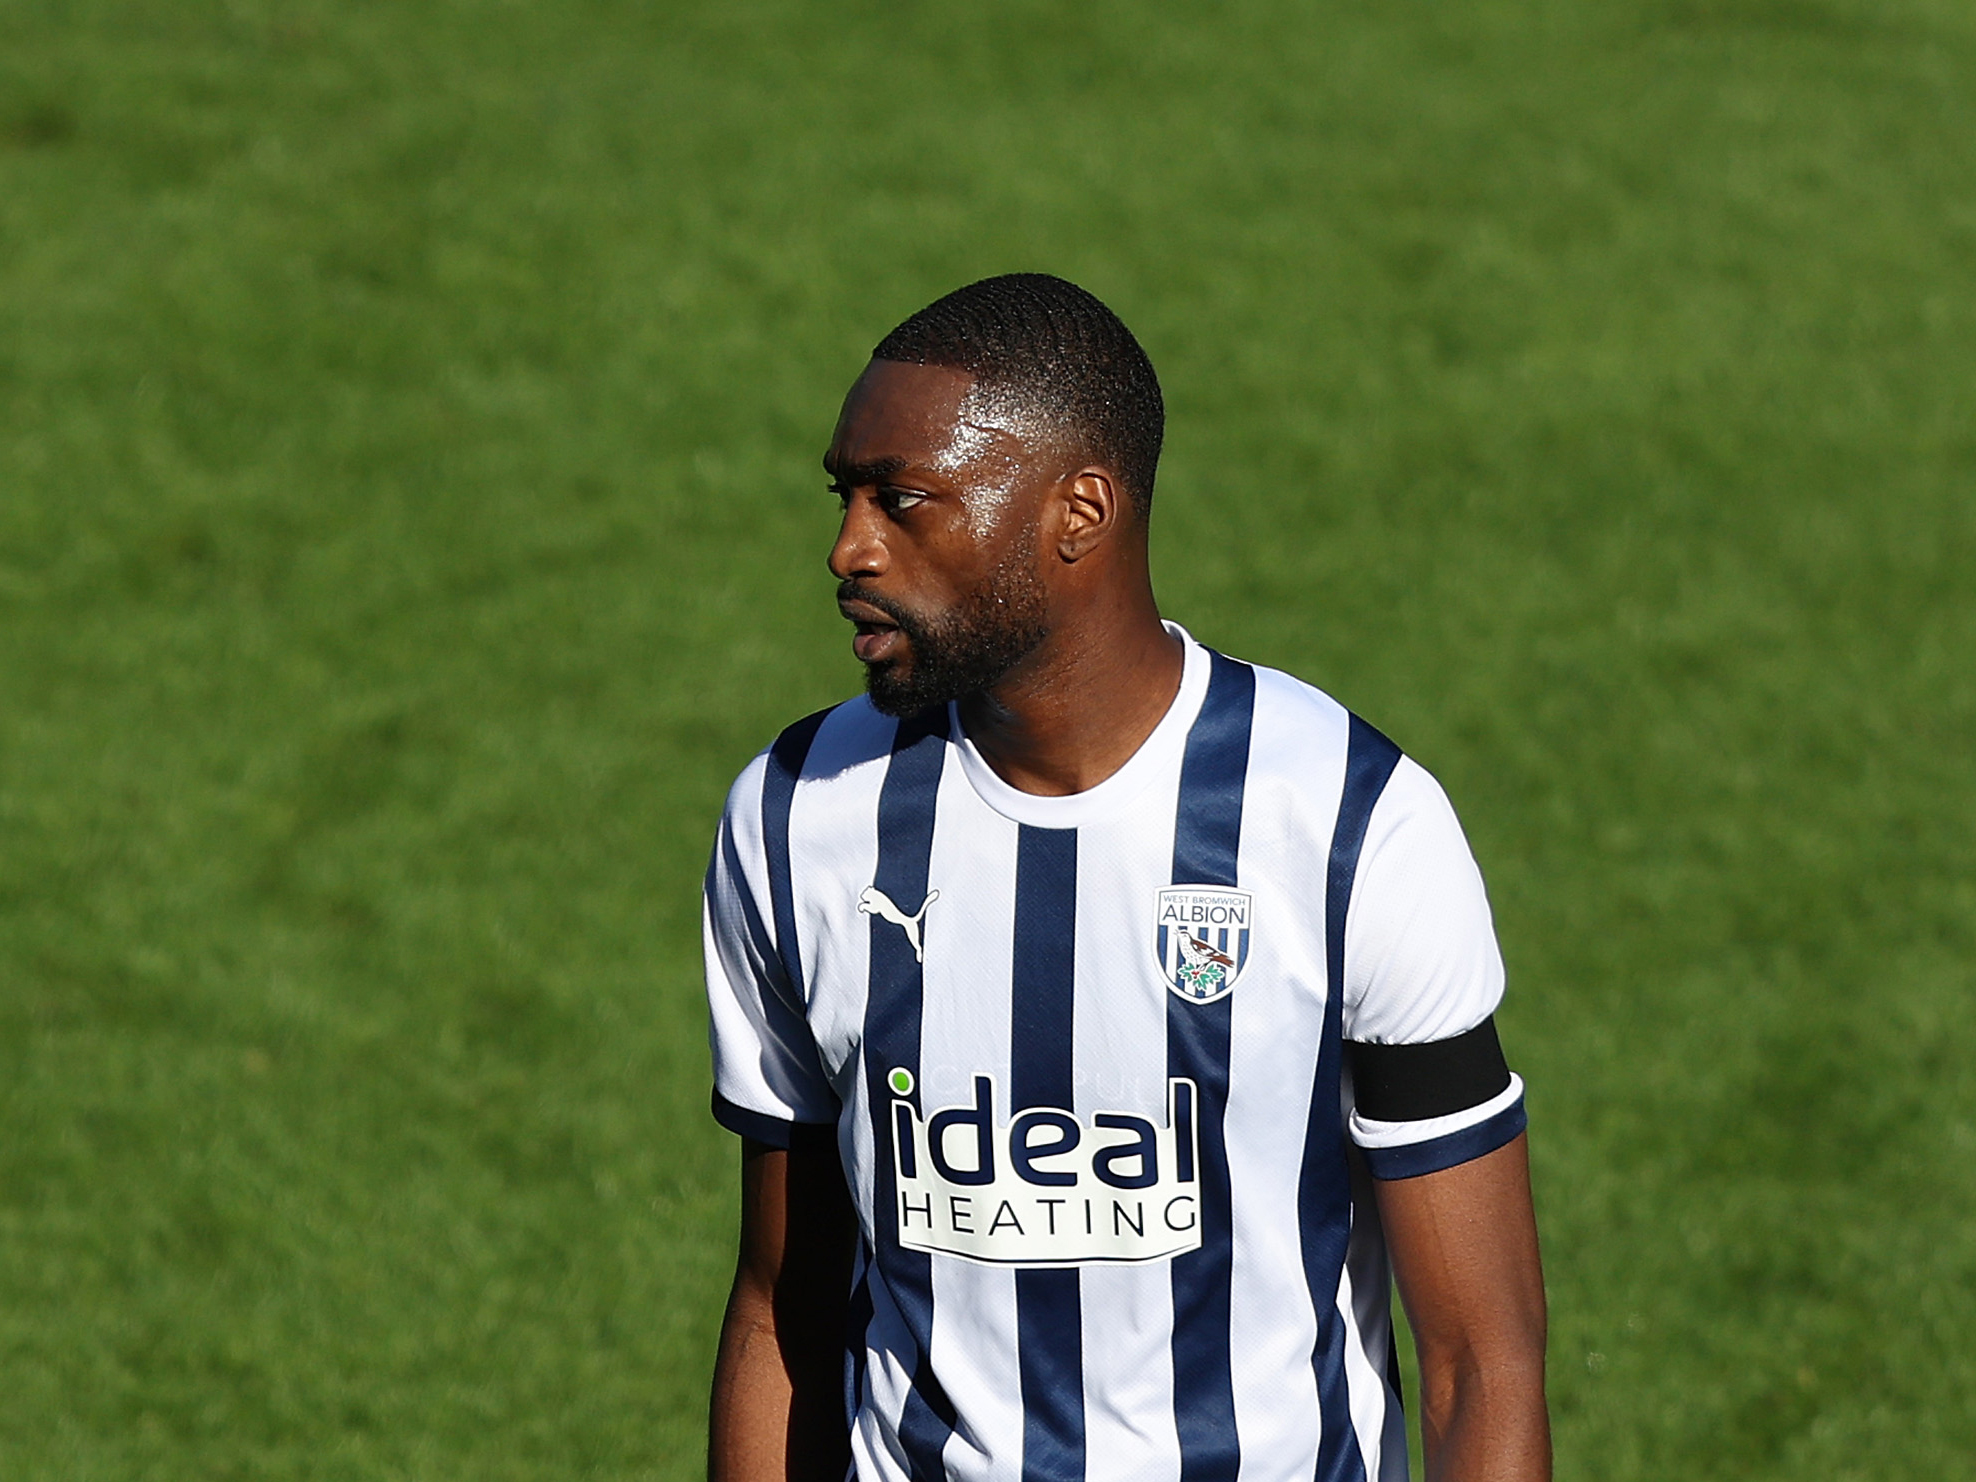 Semi Ajayi in Albion's home shirt in a match at The Hawthorns